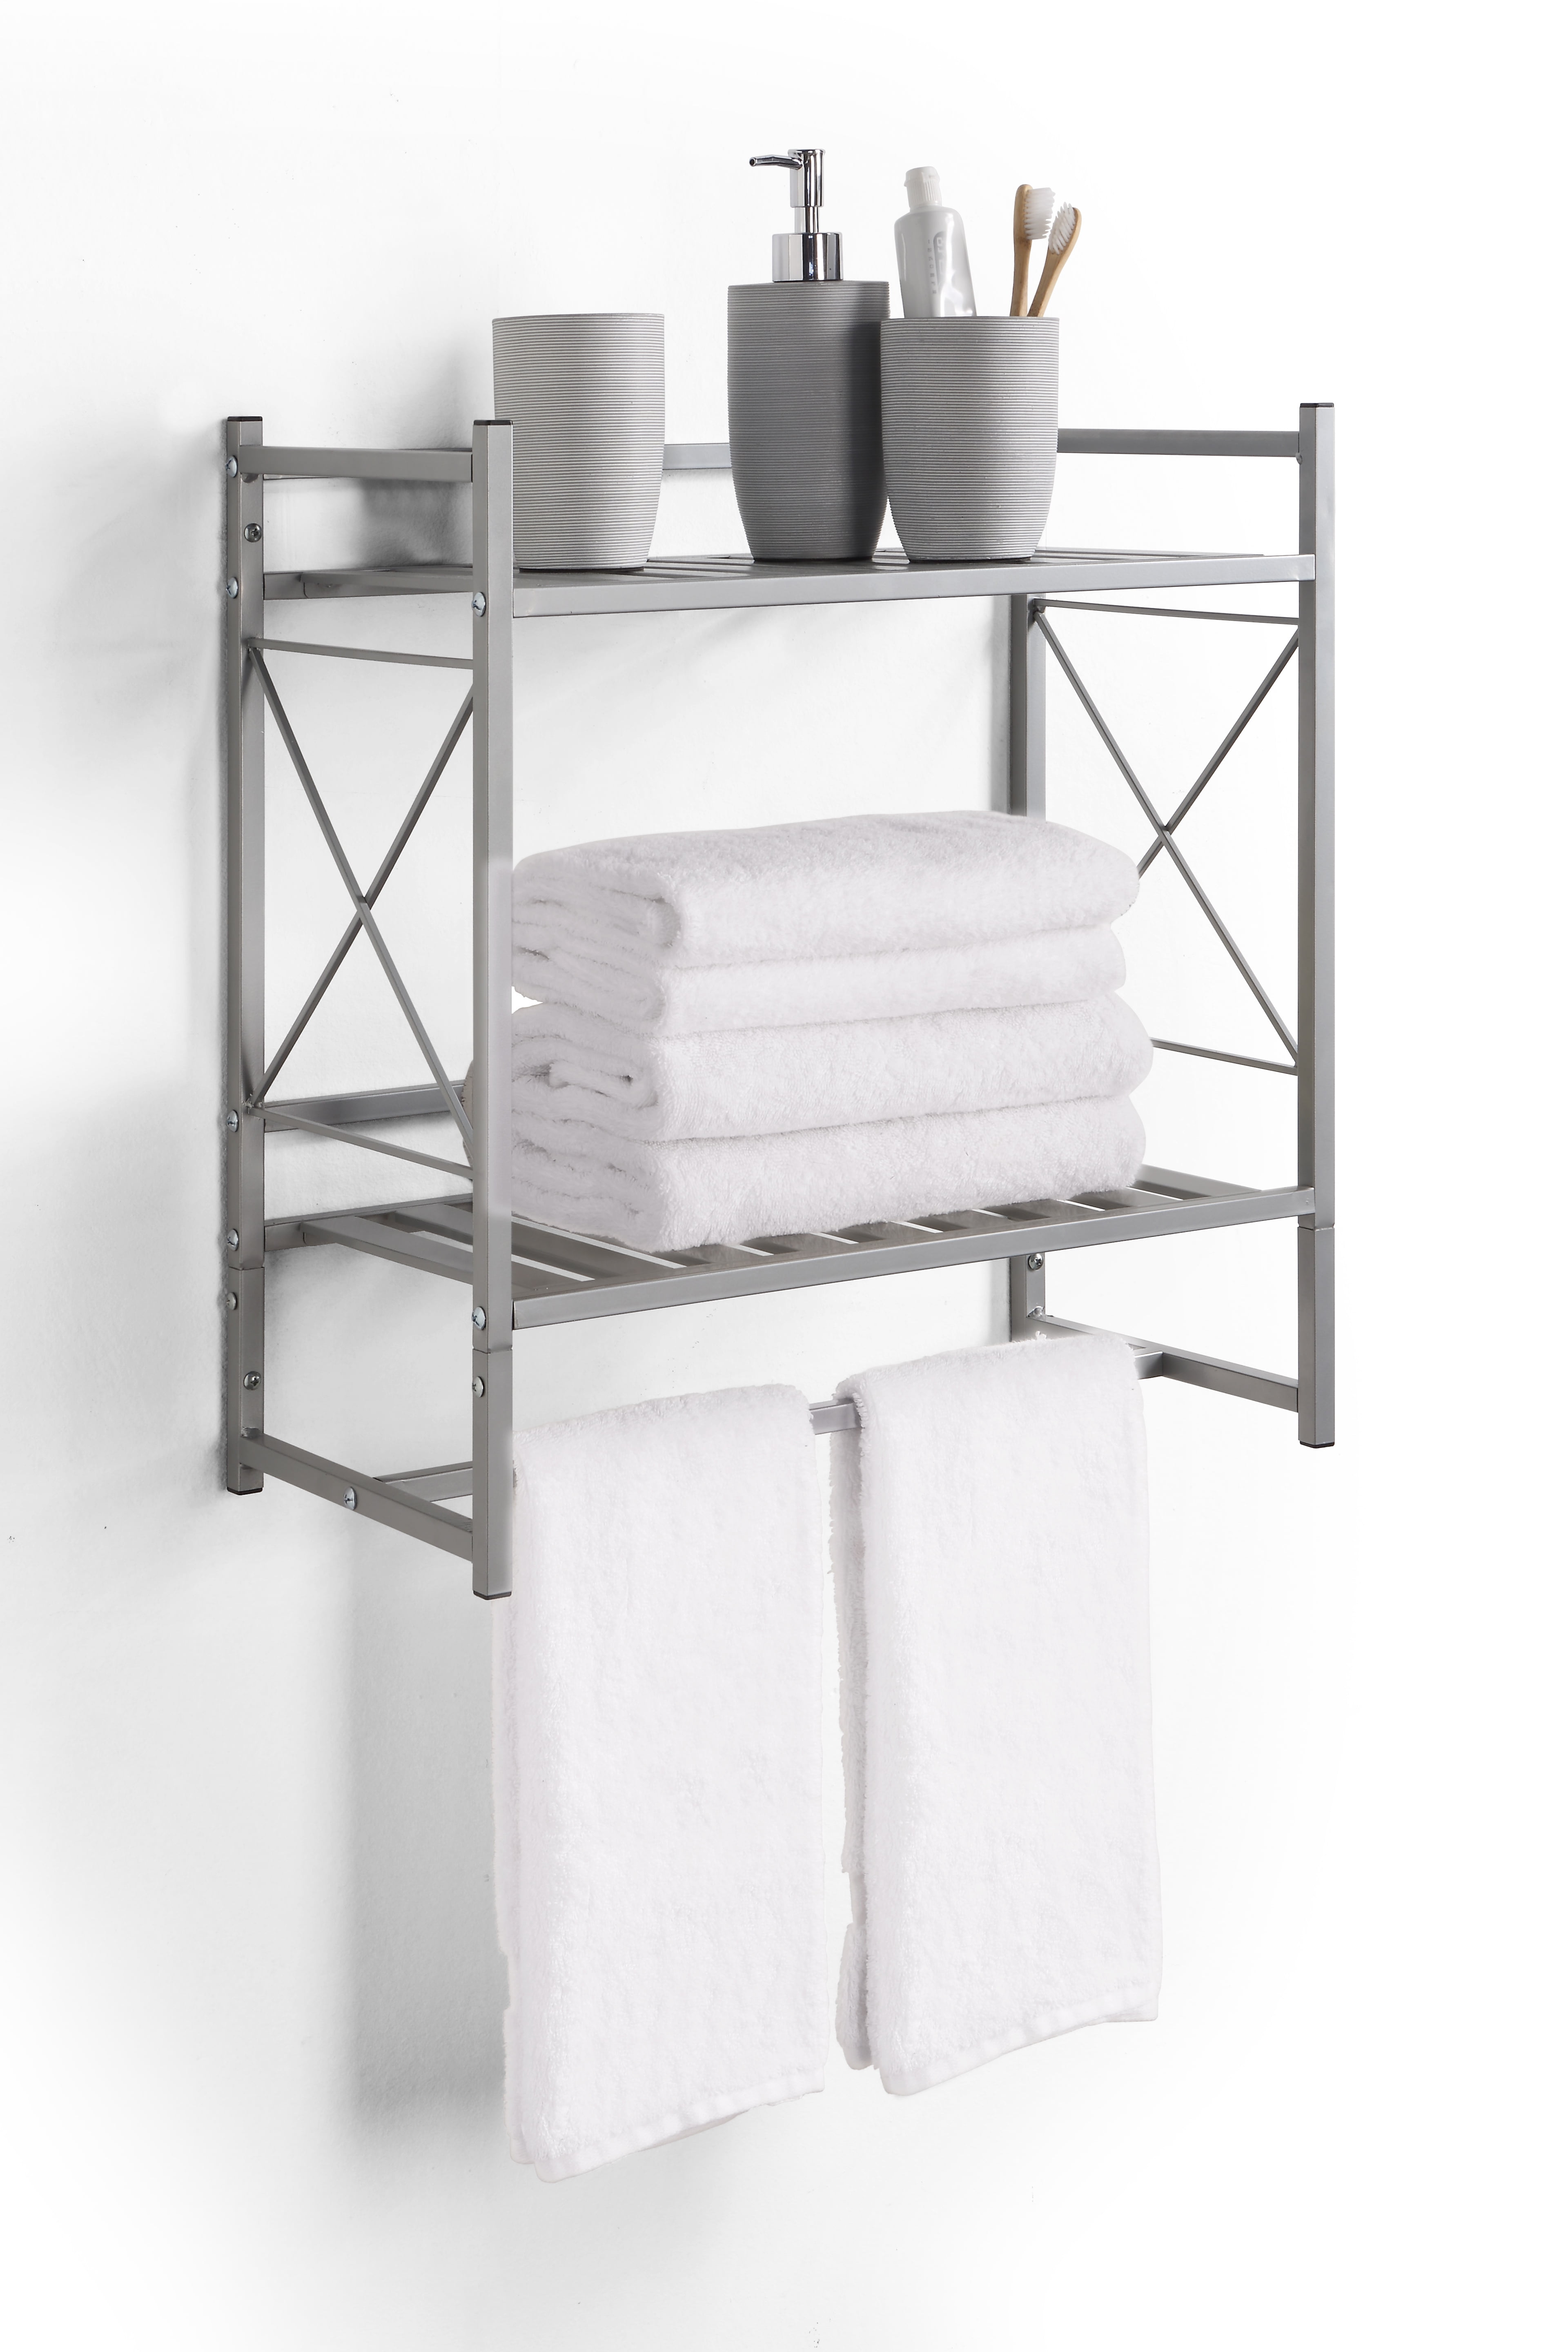 SunnyPoint Classic Square Bathroom Shelf Tier Shelf with Towel Bar Wall  Mounted Shower Storage (Classic Wall Mount SIL)